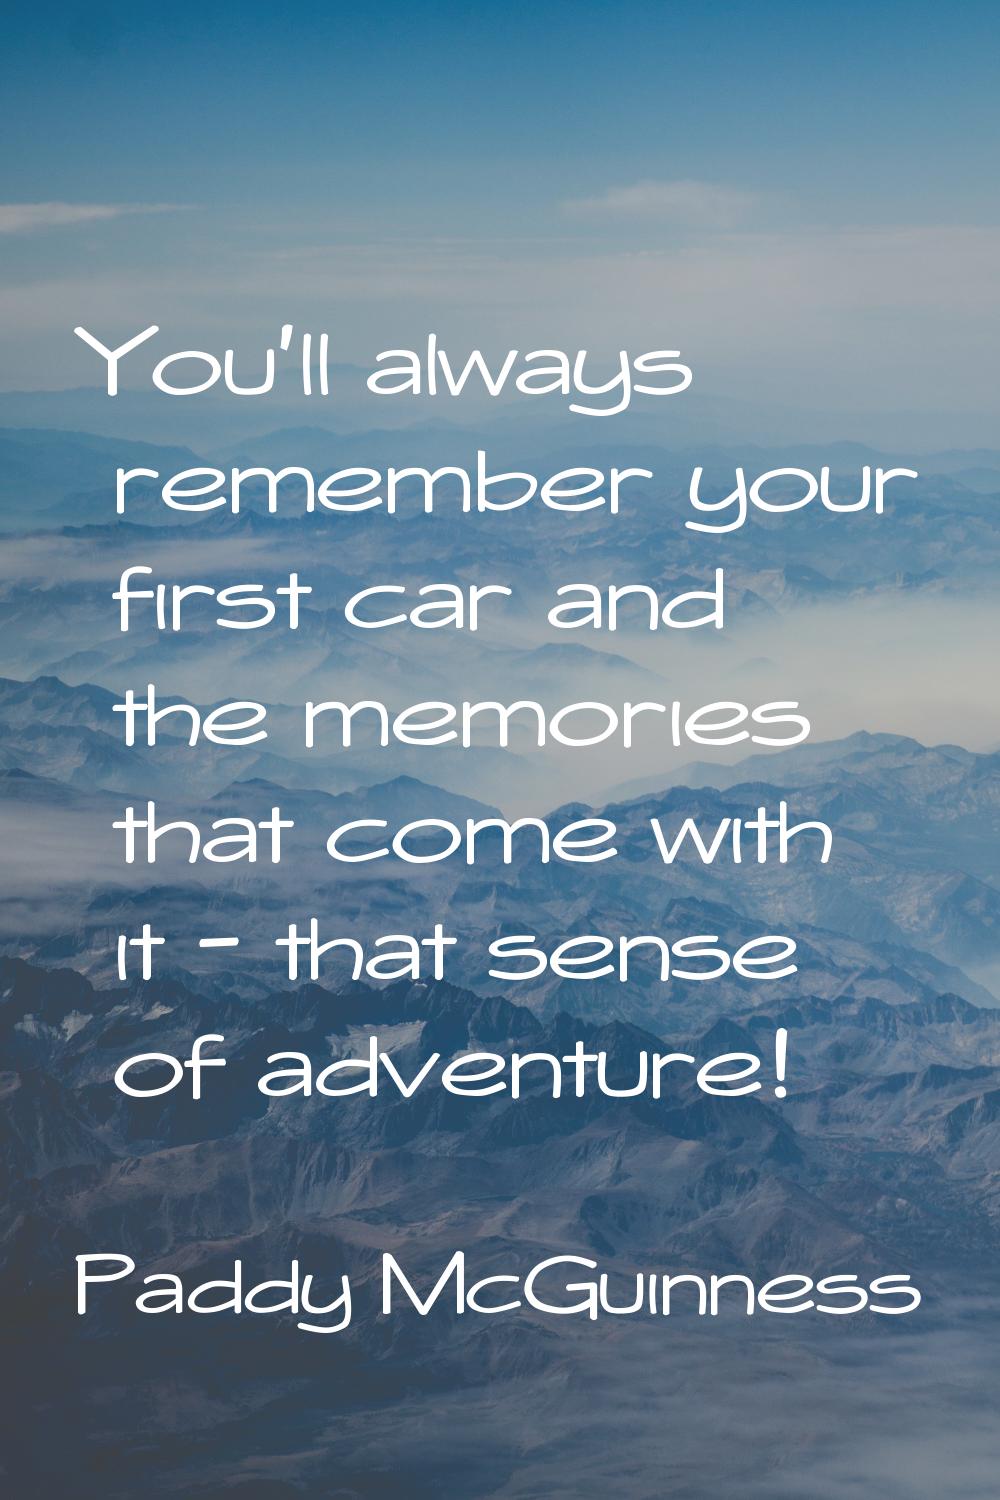 You'll always remember your first car and the memories that come with it - that sense of adventure!